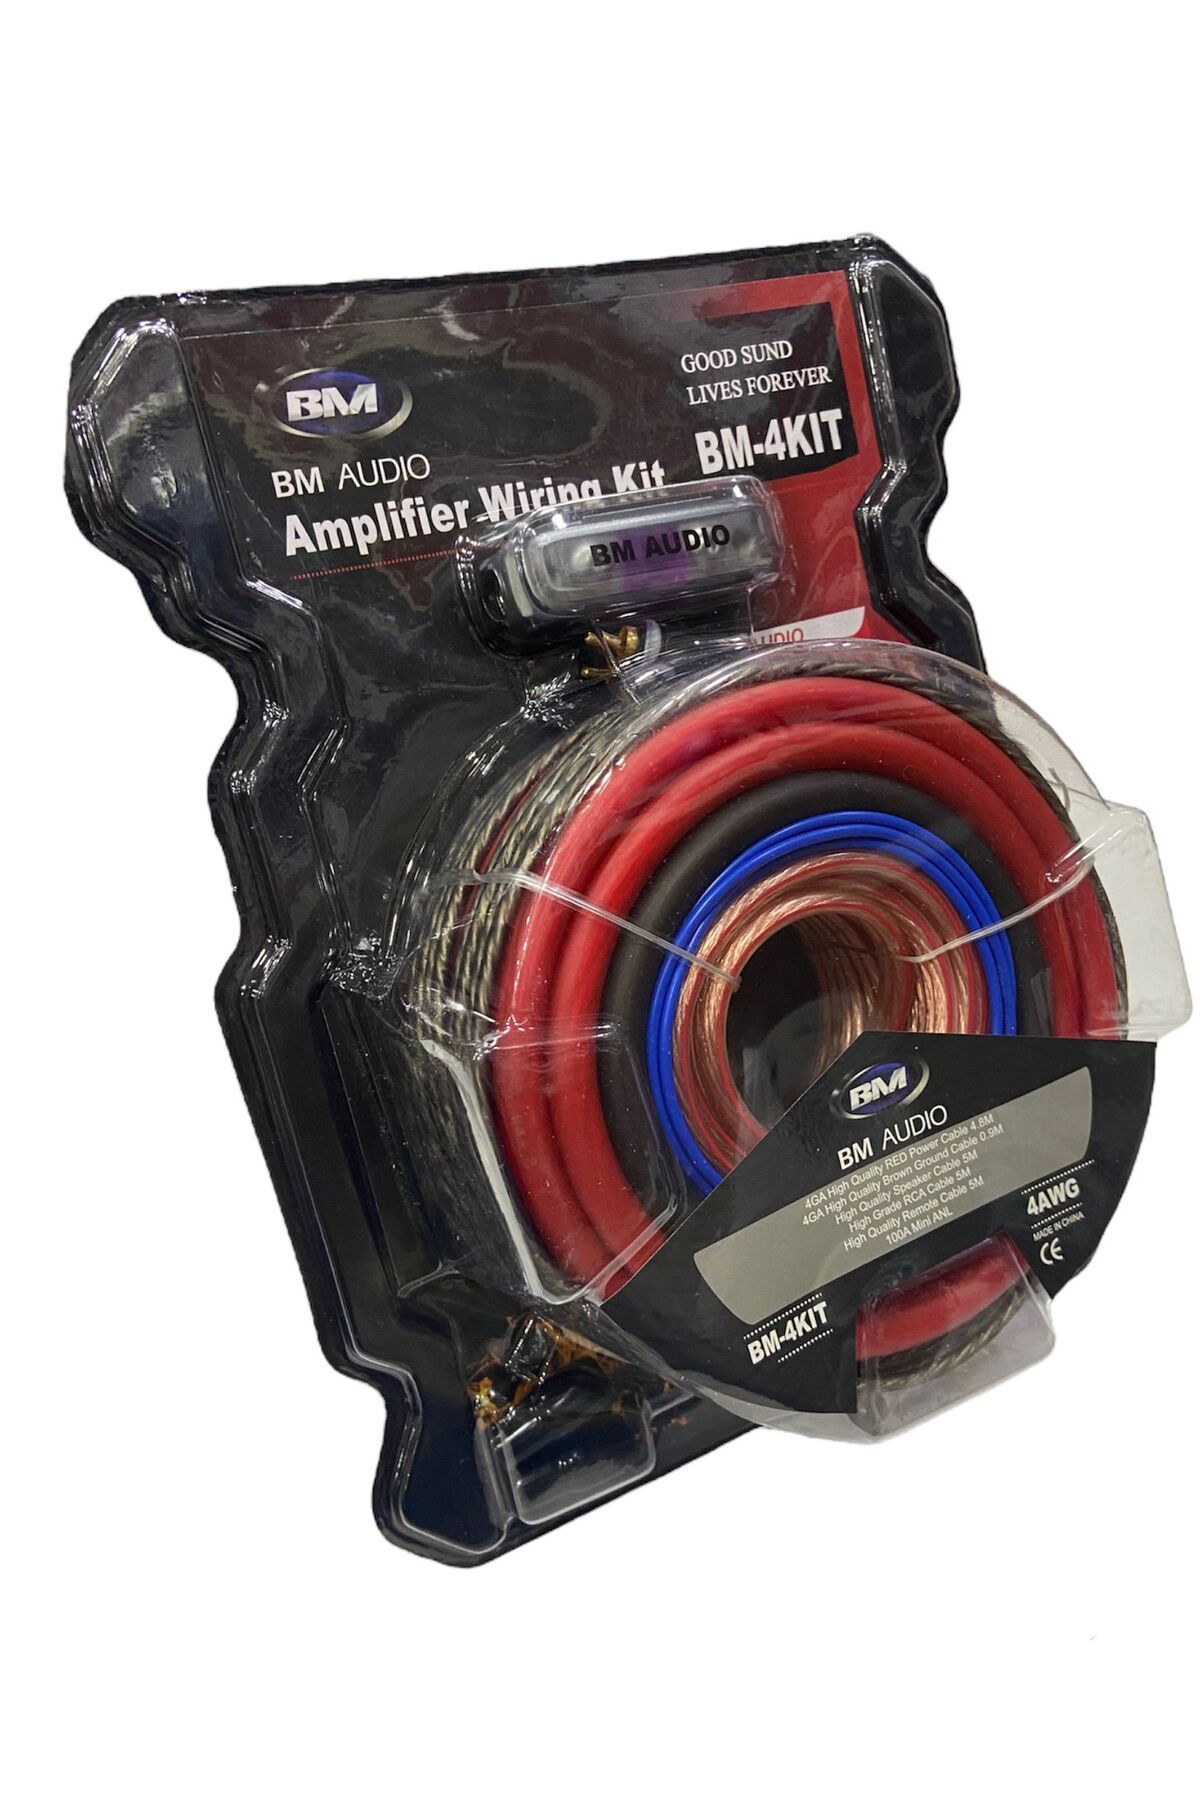 Cable special automotive available in brown and red